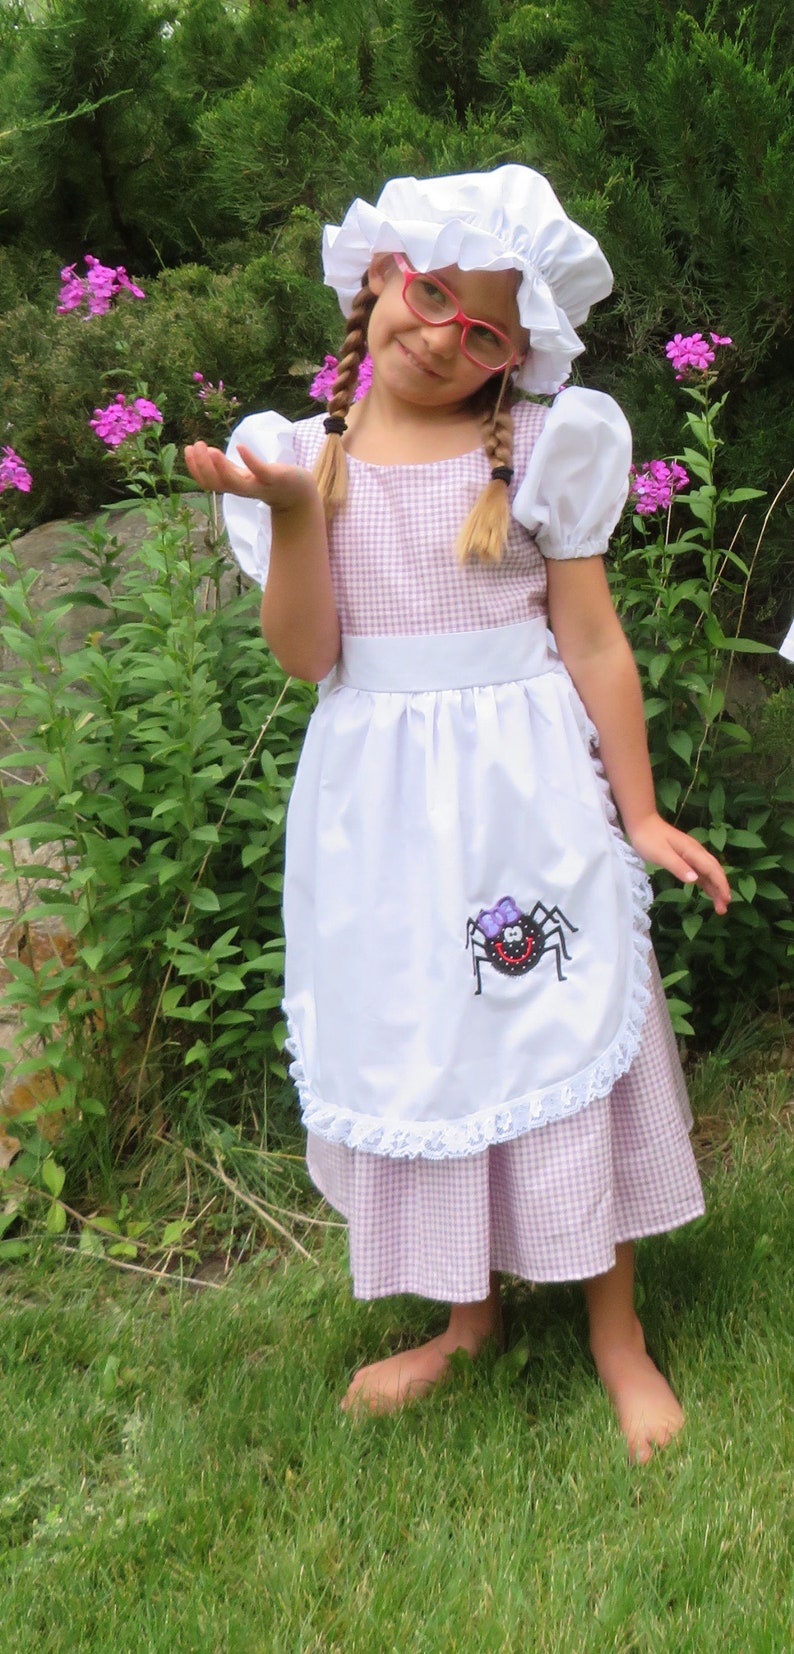 Little Miss Muffett dress and mop cap, Girls costume NEW Fairy tale, nursery rhyme, curds & whey, gingham check, purple, spider, story book, image 3